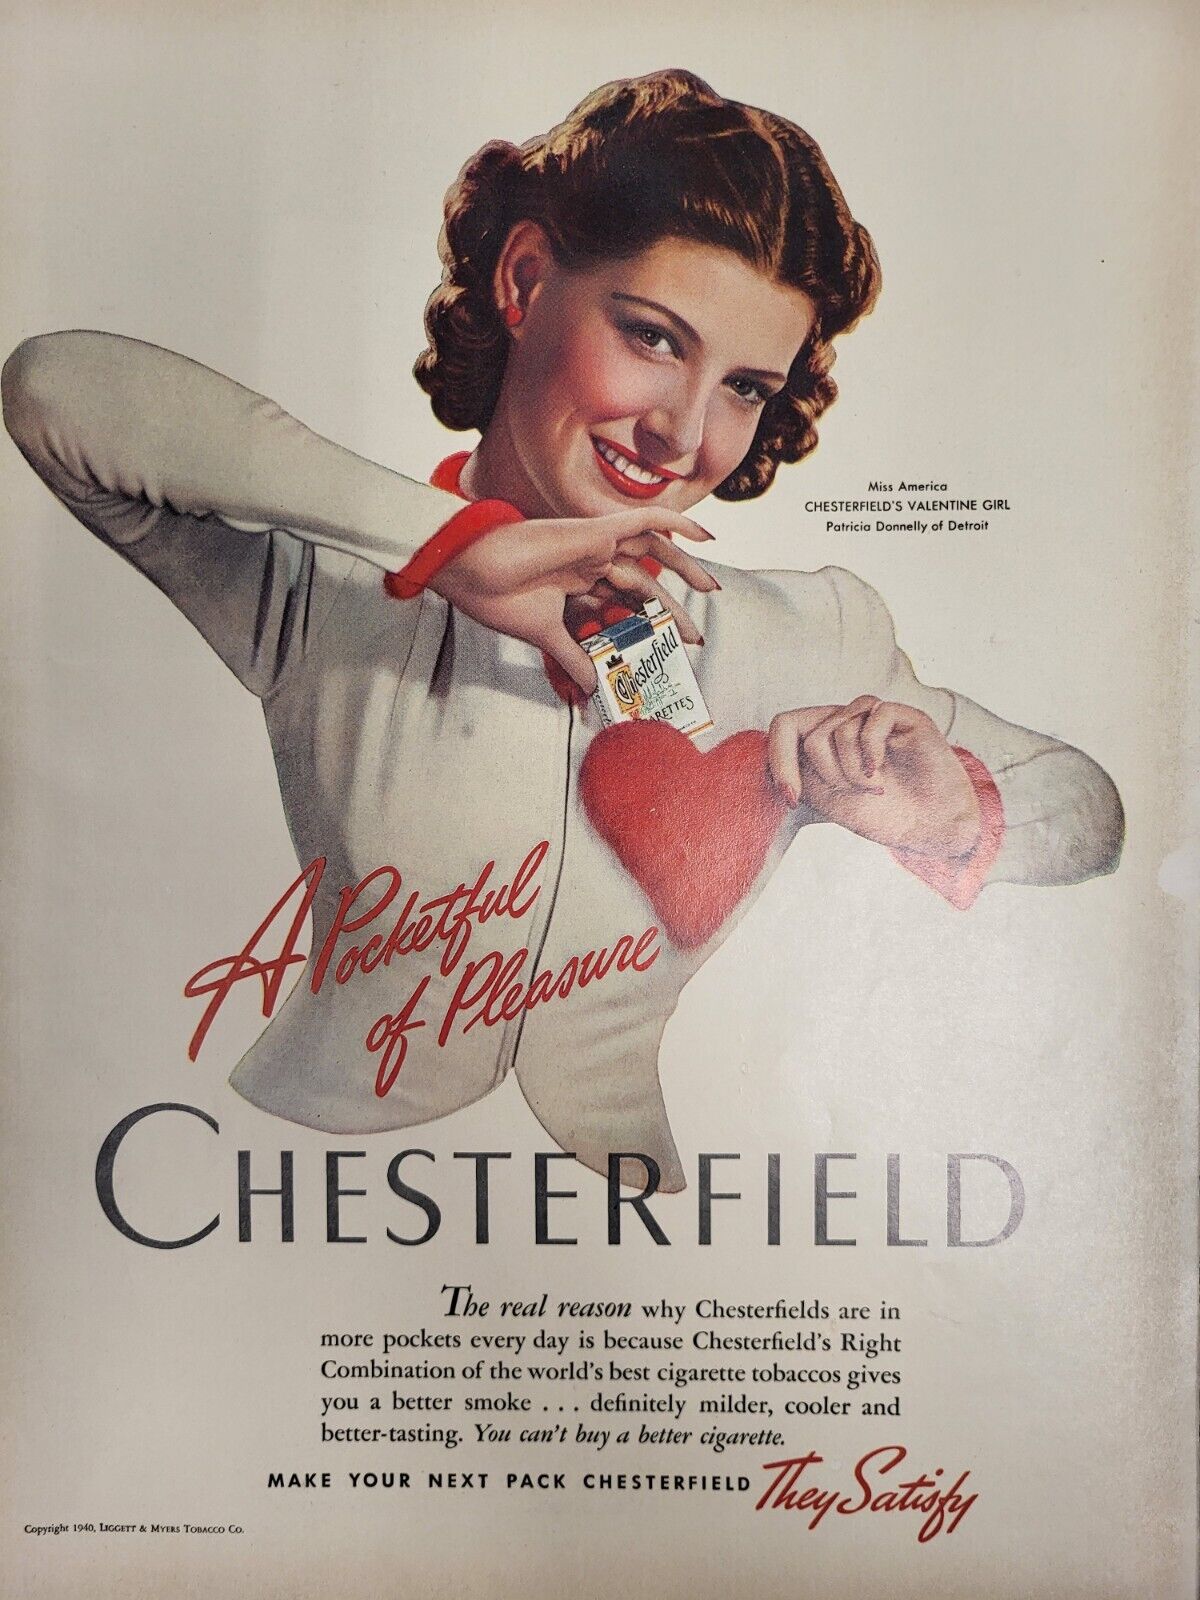 1940 Chesterfield Cigarettes Print Advertising LIFE Miss America Valentine Girl